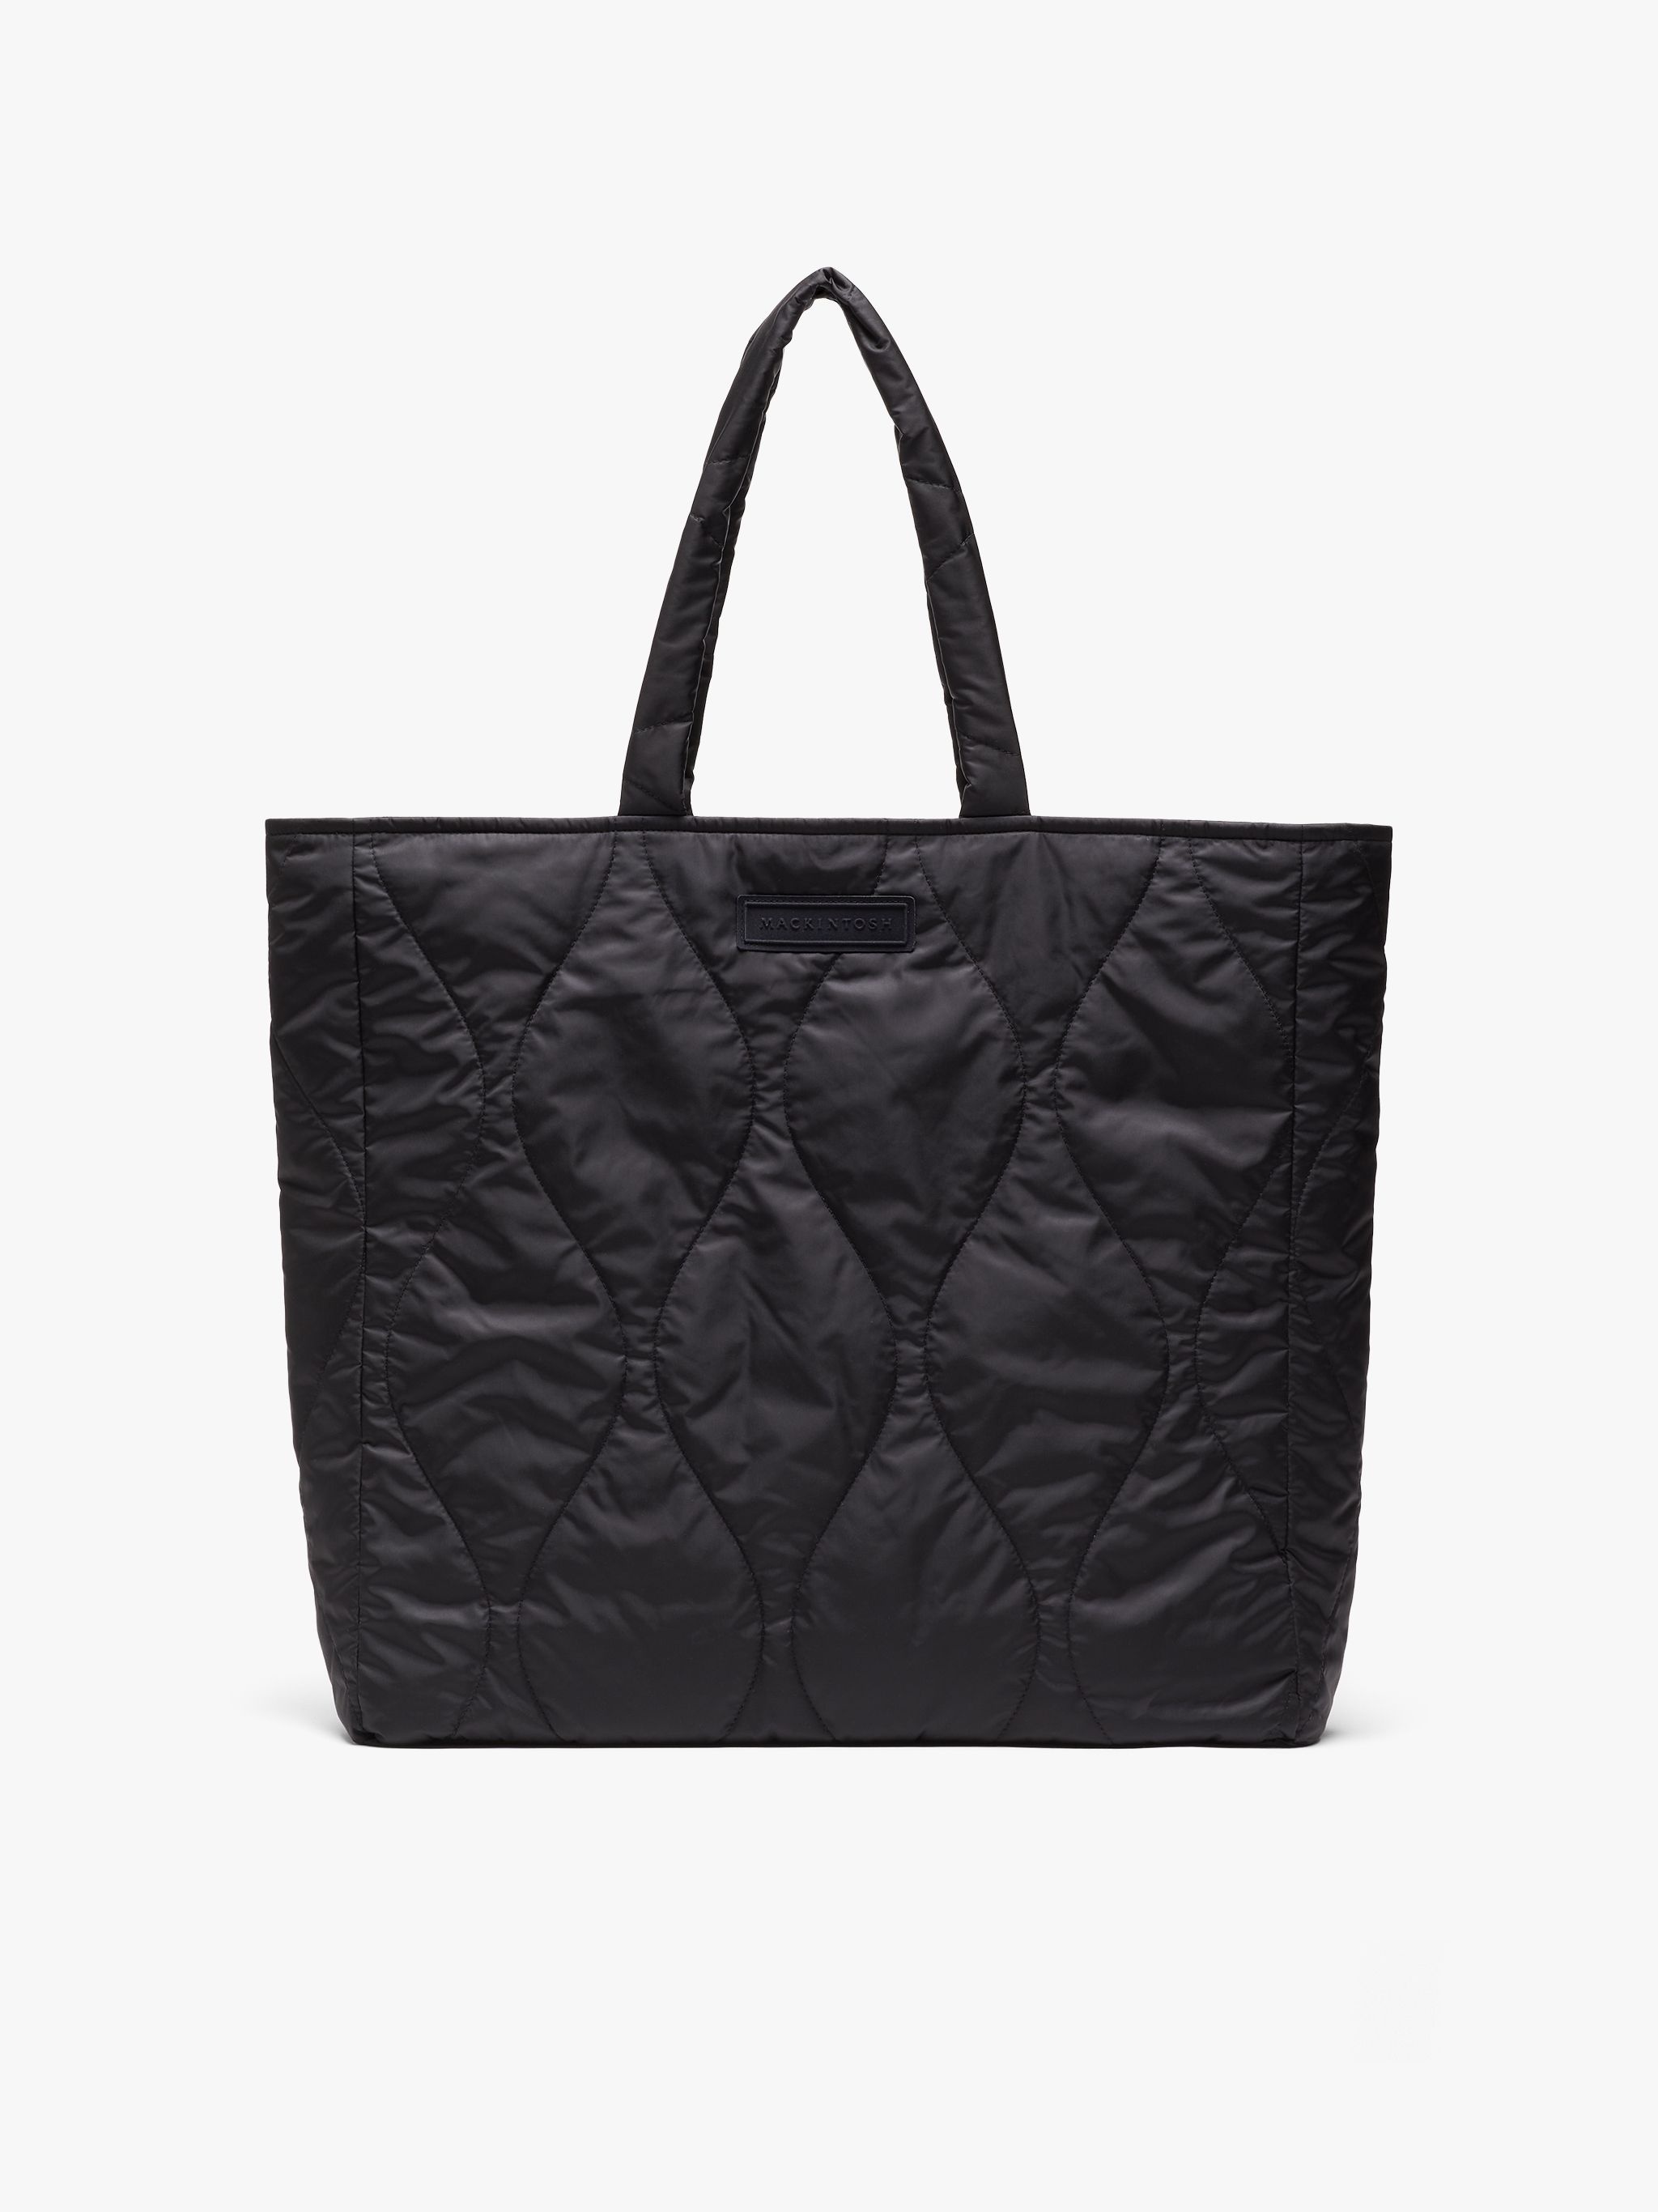 LEXIS BLACK QUILTED NYLON BAG | ACC-BA02 - 1